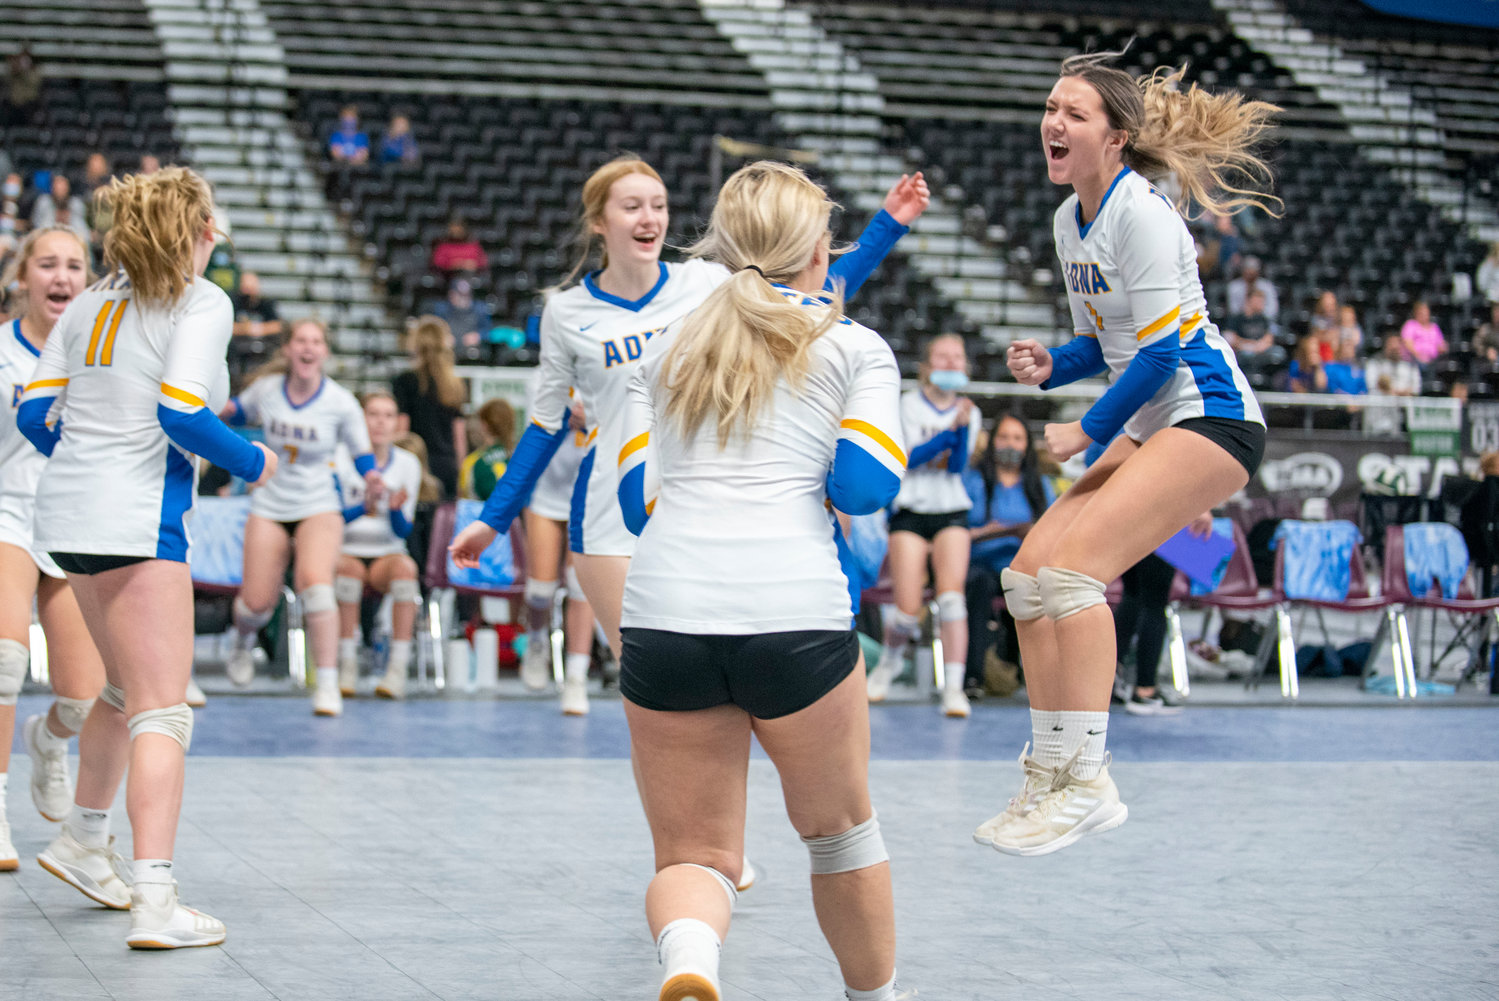 Adna’s Alyssa Davis, right, jumps in celebration after the Pirates score against Walla Walla Valley Academy on Thursday.